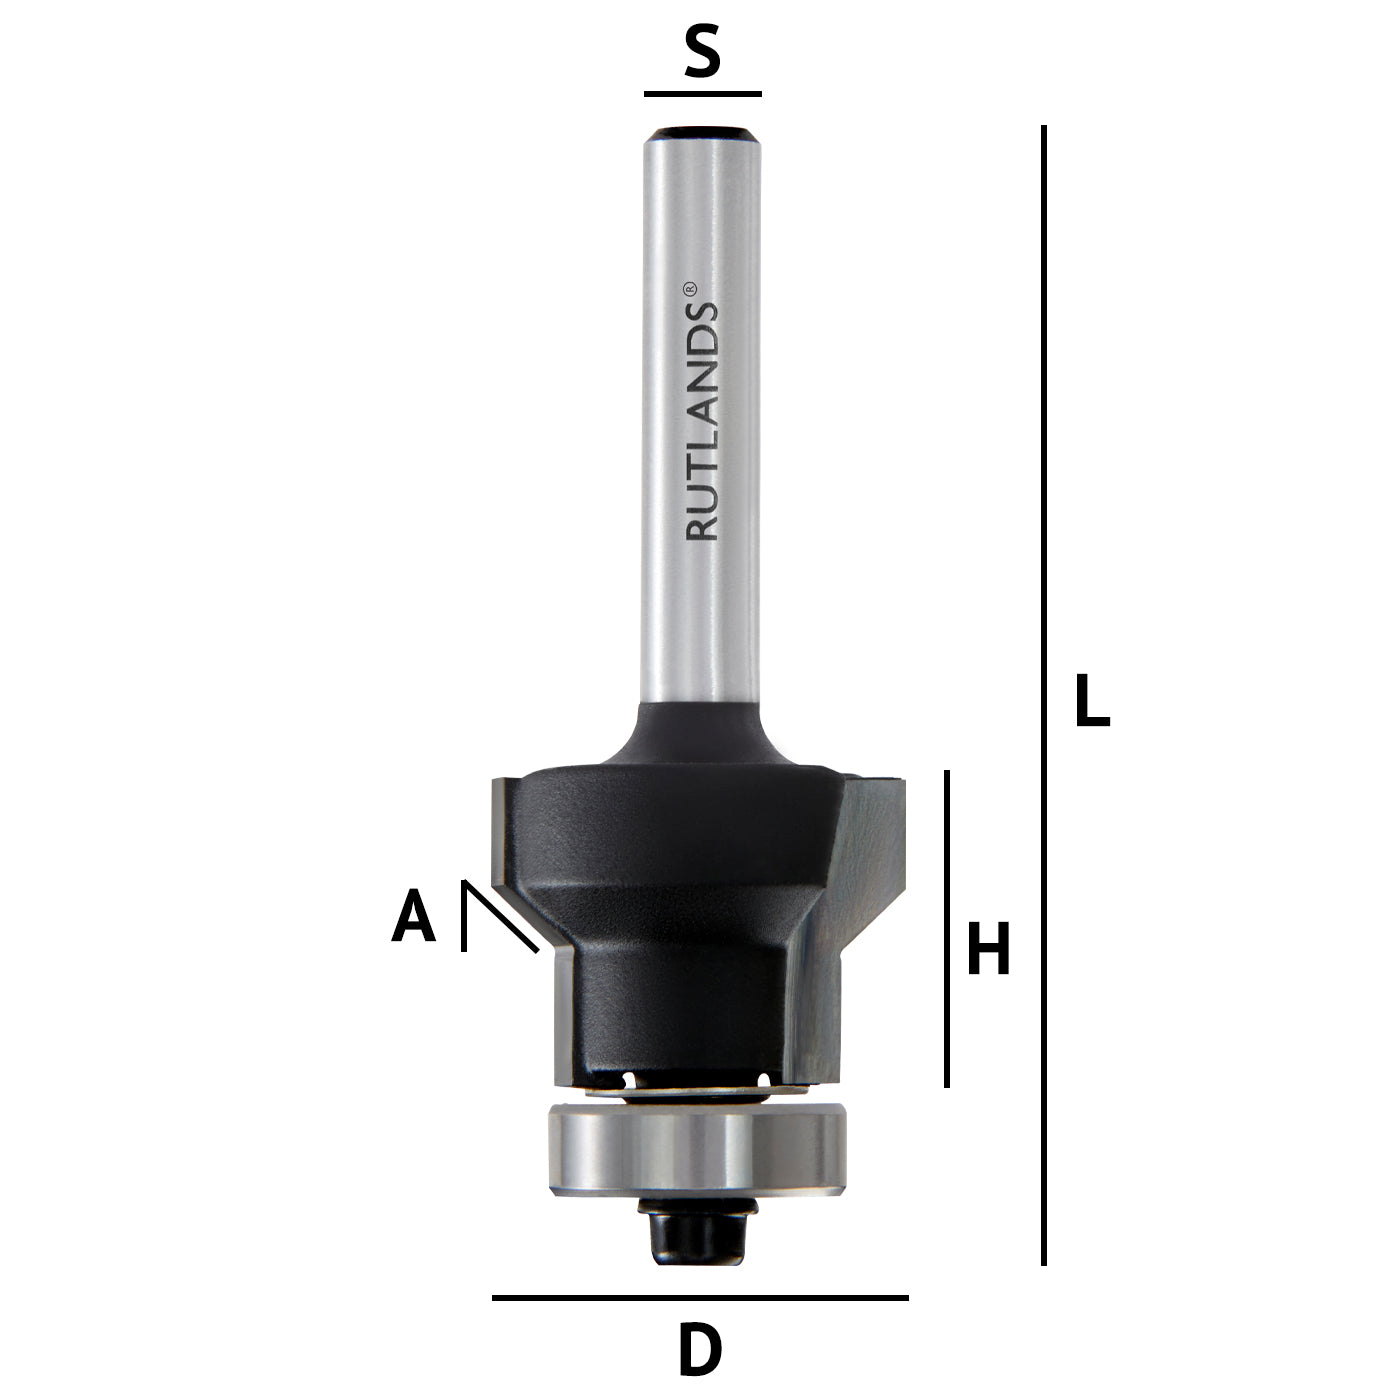 Router Bit - Combination Flush & Bevel Trim with Bearing - D=22mm H=16mm A=45° L=61mm S=1/4"